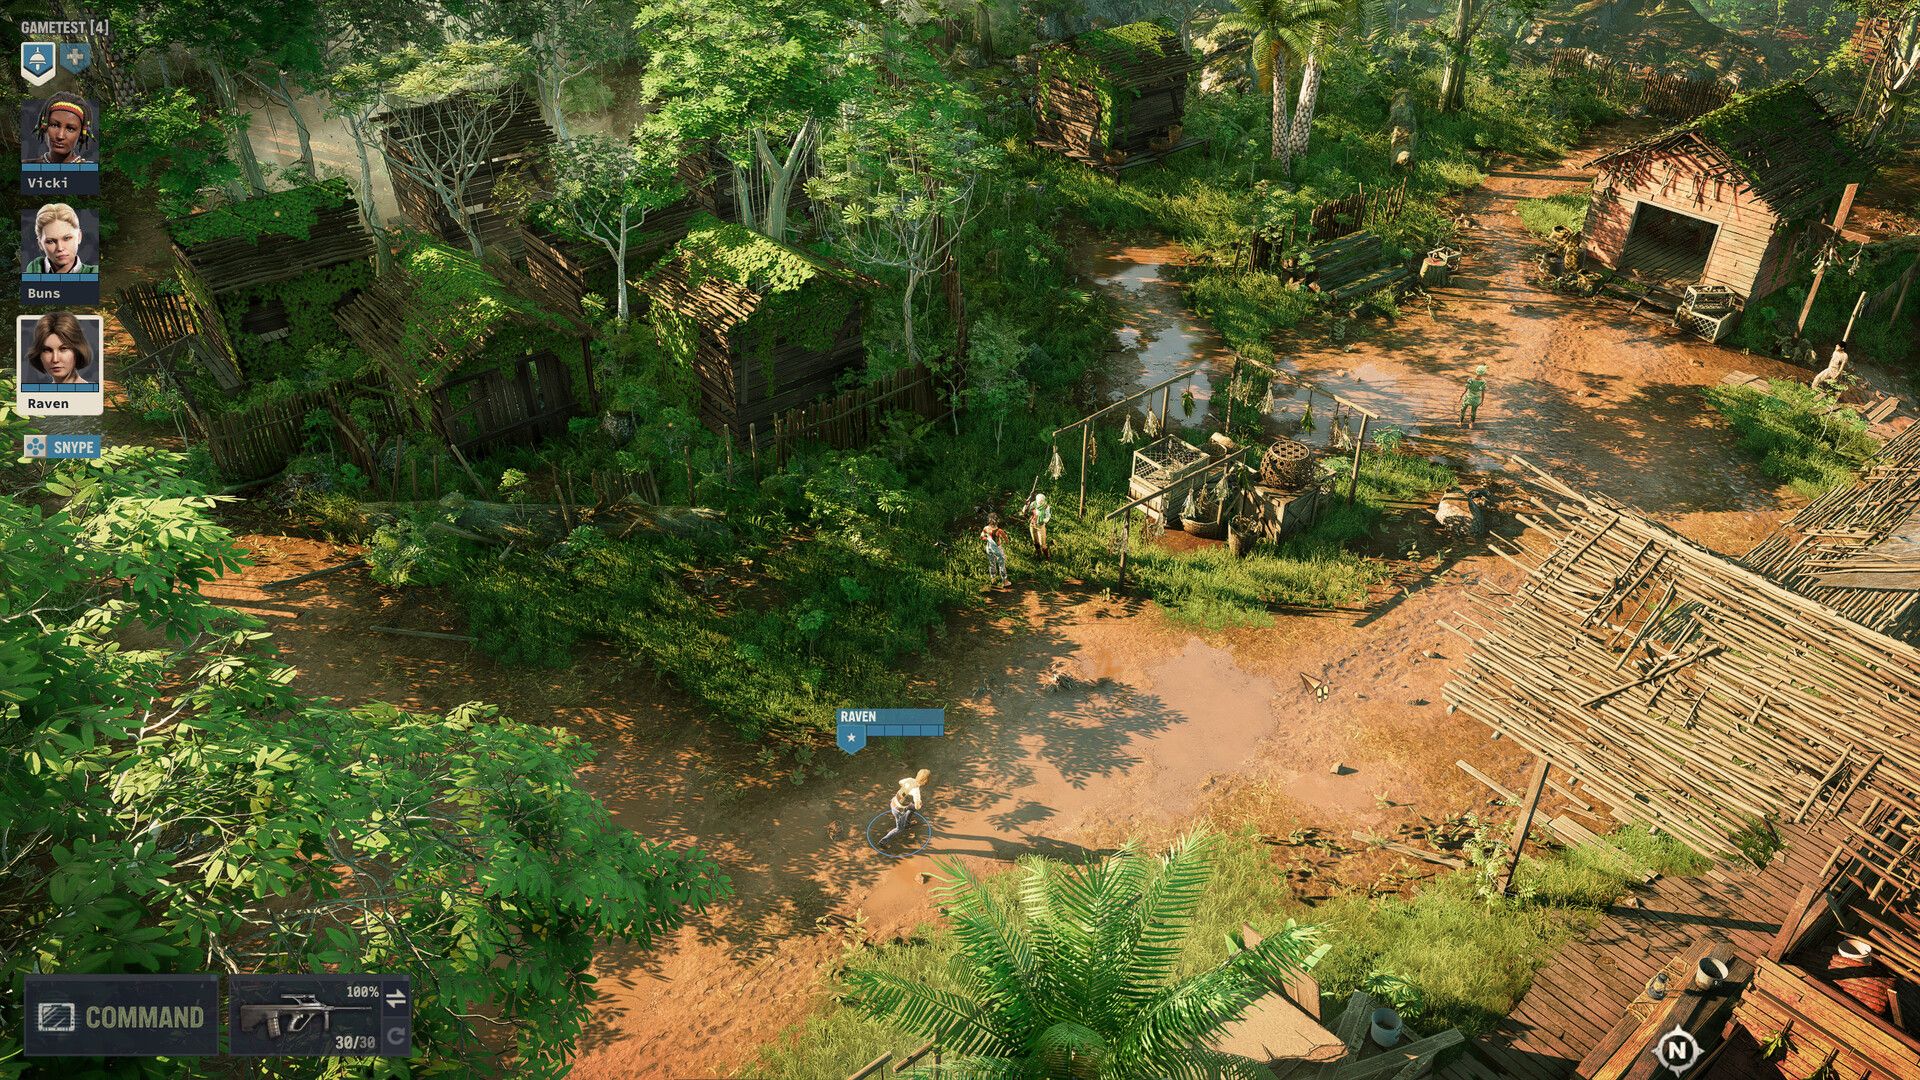 Jagged Alliance 3 is Out Now on PC, Fully Playable on Steam Deck